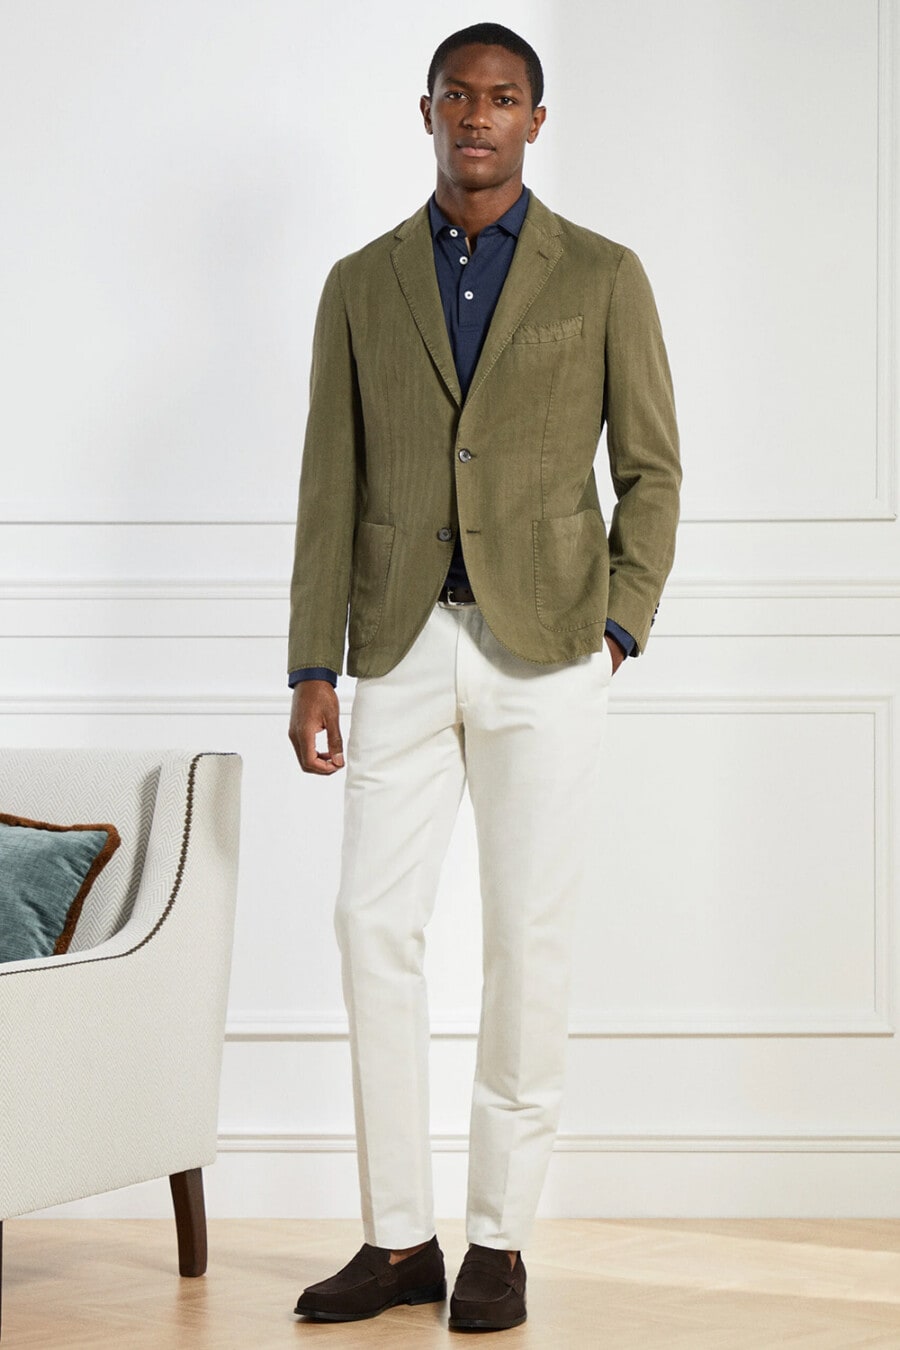 Men's white chinos, navy blue shirt, green blazer and brown suede penny loafers worn sockless outfit